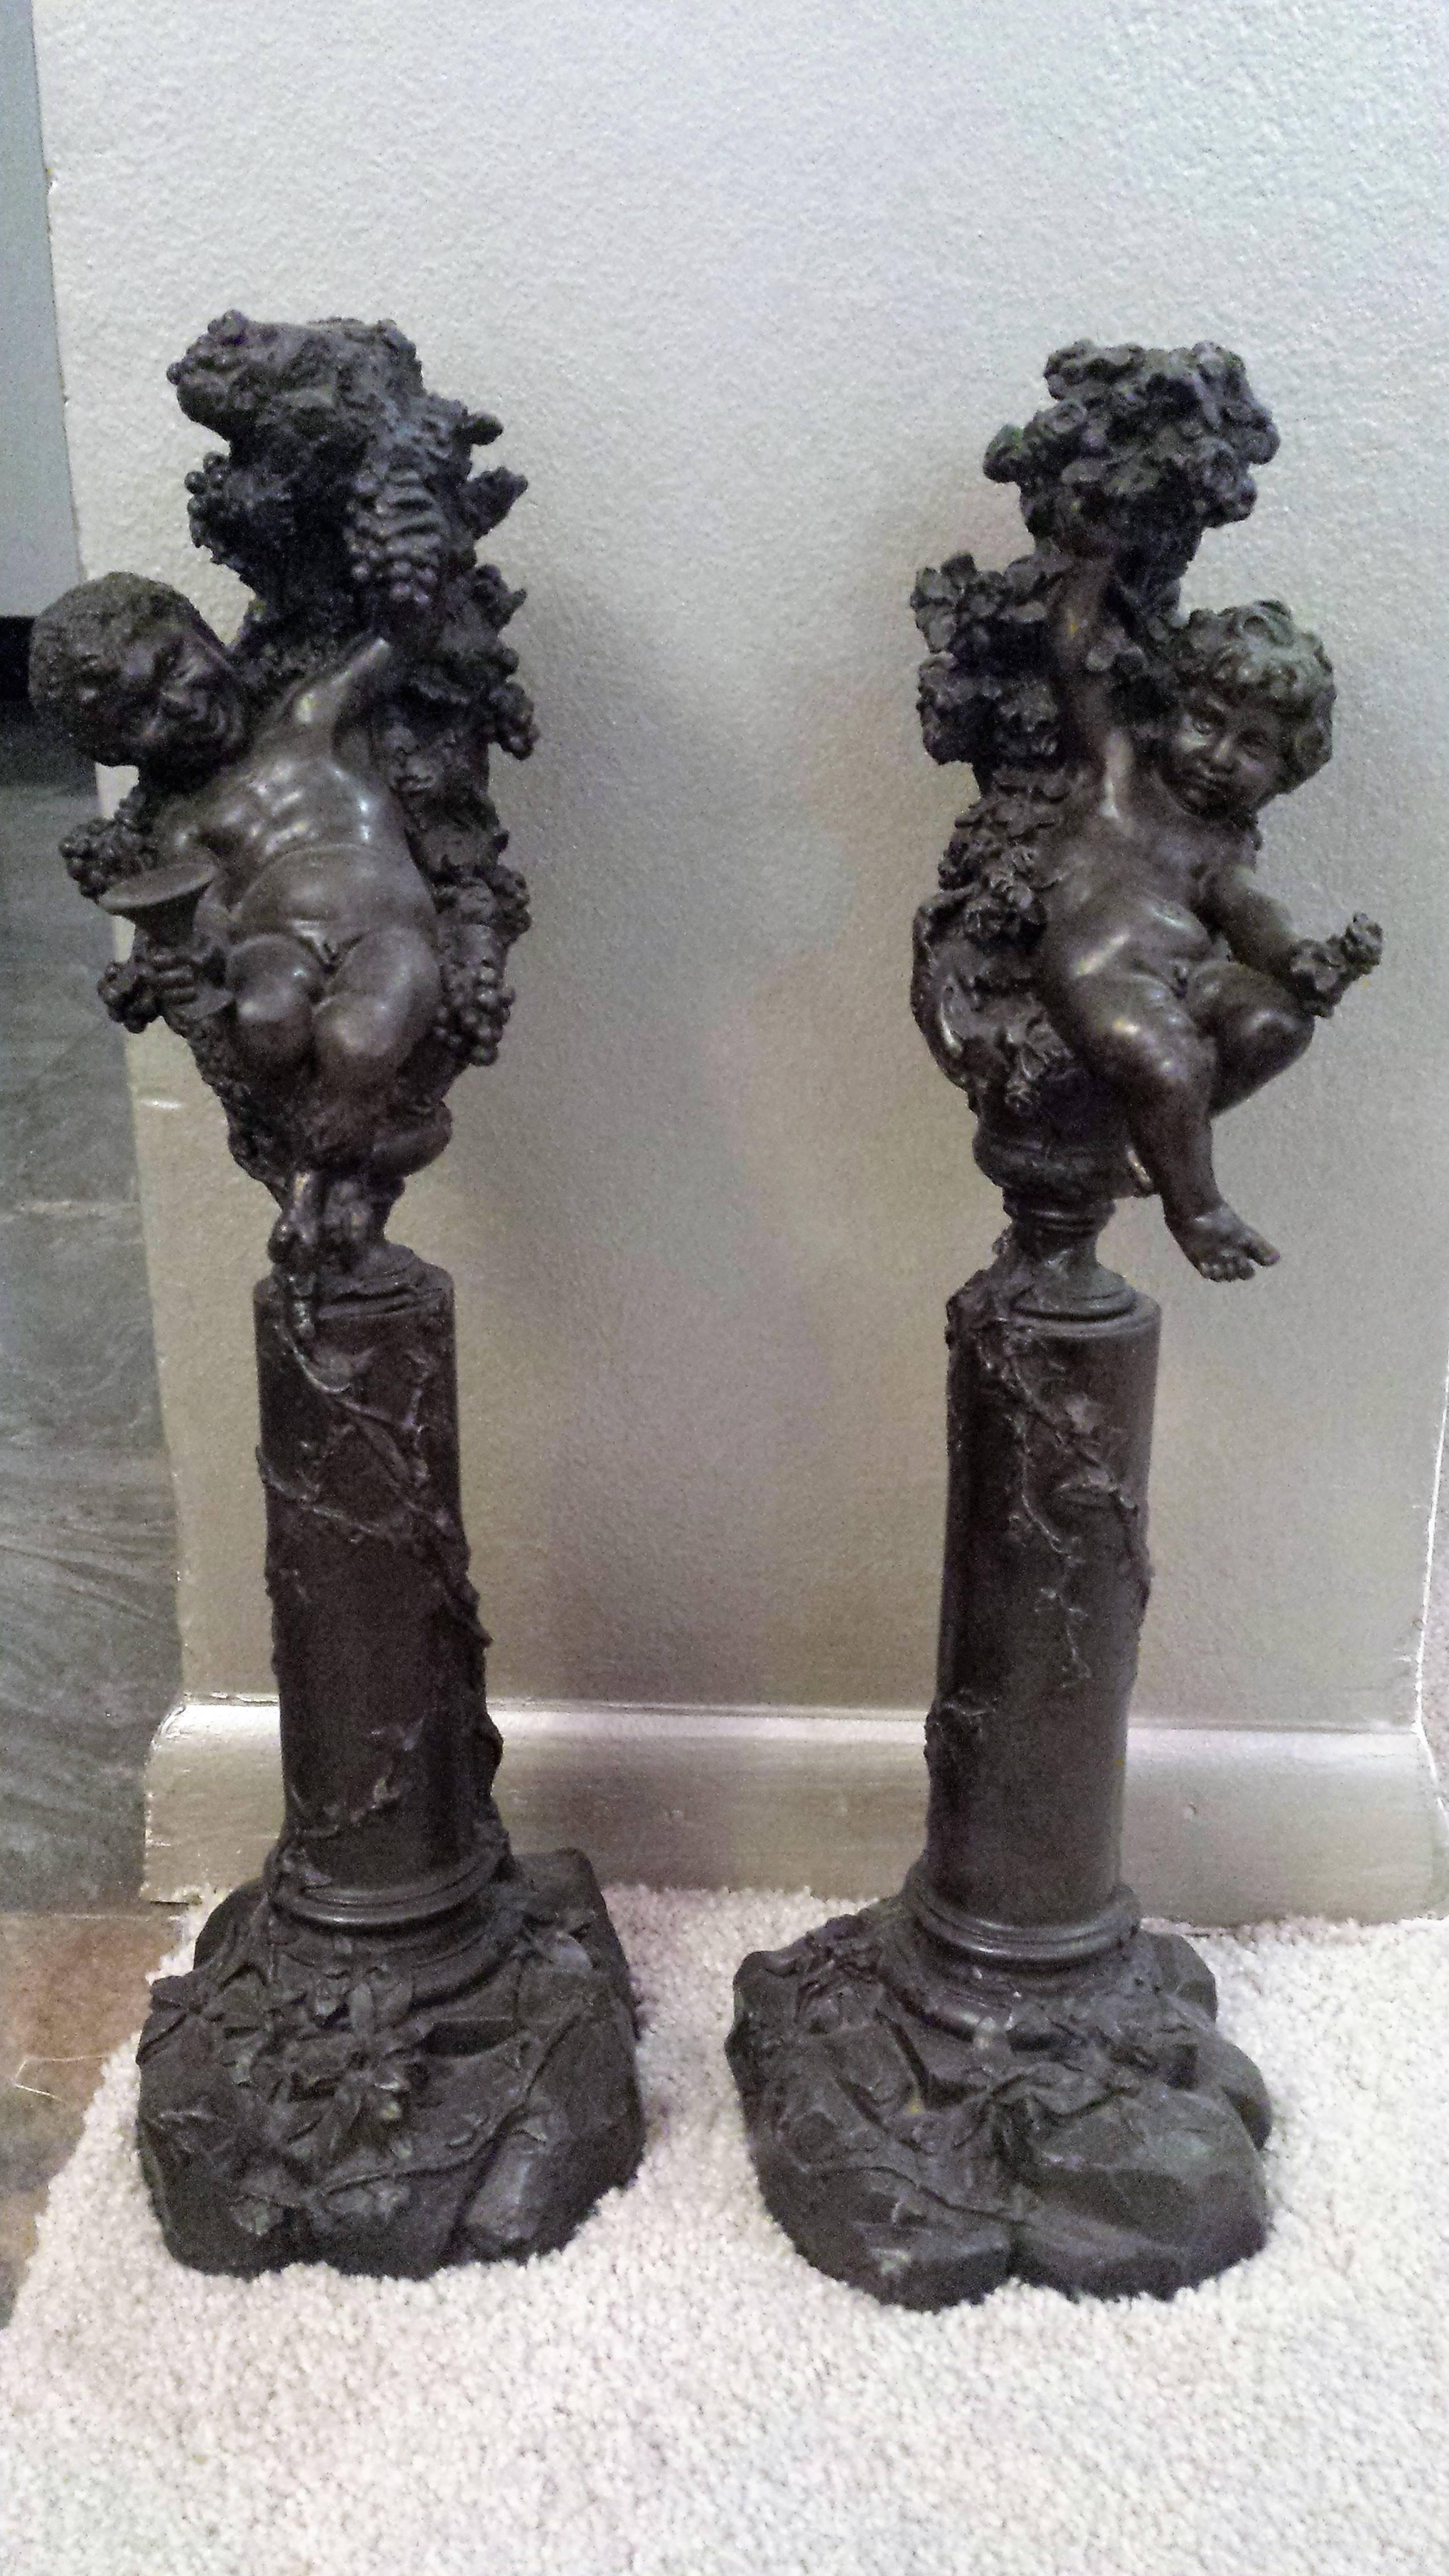 A lovely pair of bronze statues depicting joyous cherubic figures. 
Can be used as a sculpture or as single candle candleholders
The cherub figure was used a lot in Renaissance art and represented as a naked, chubby male baby or child. 
During